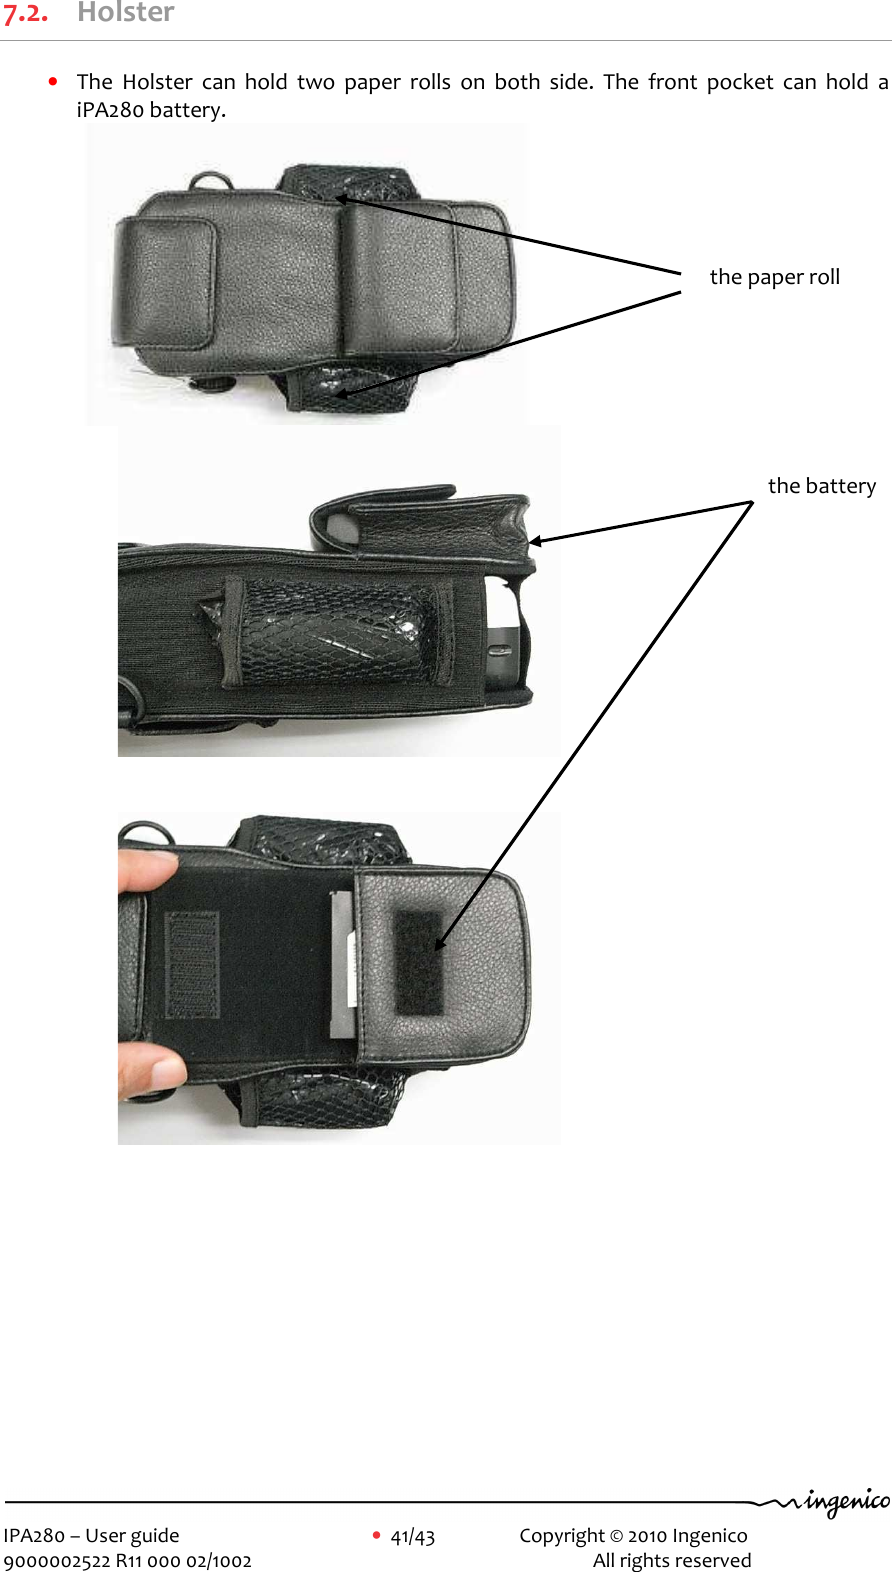     IPA280 – User guide      •  41/43    Copyright © 2010 Ingenico   9000002522 R11 000 02/1002          All rights reserved        7.2. Holster • The  Holster  can  hold  two  paper  rolls  on  both  side.  The  front  pocket  can  hold  a iPA280 battery.                  the paper roll the battery 